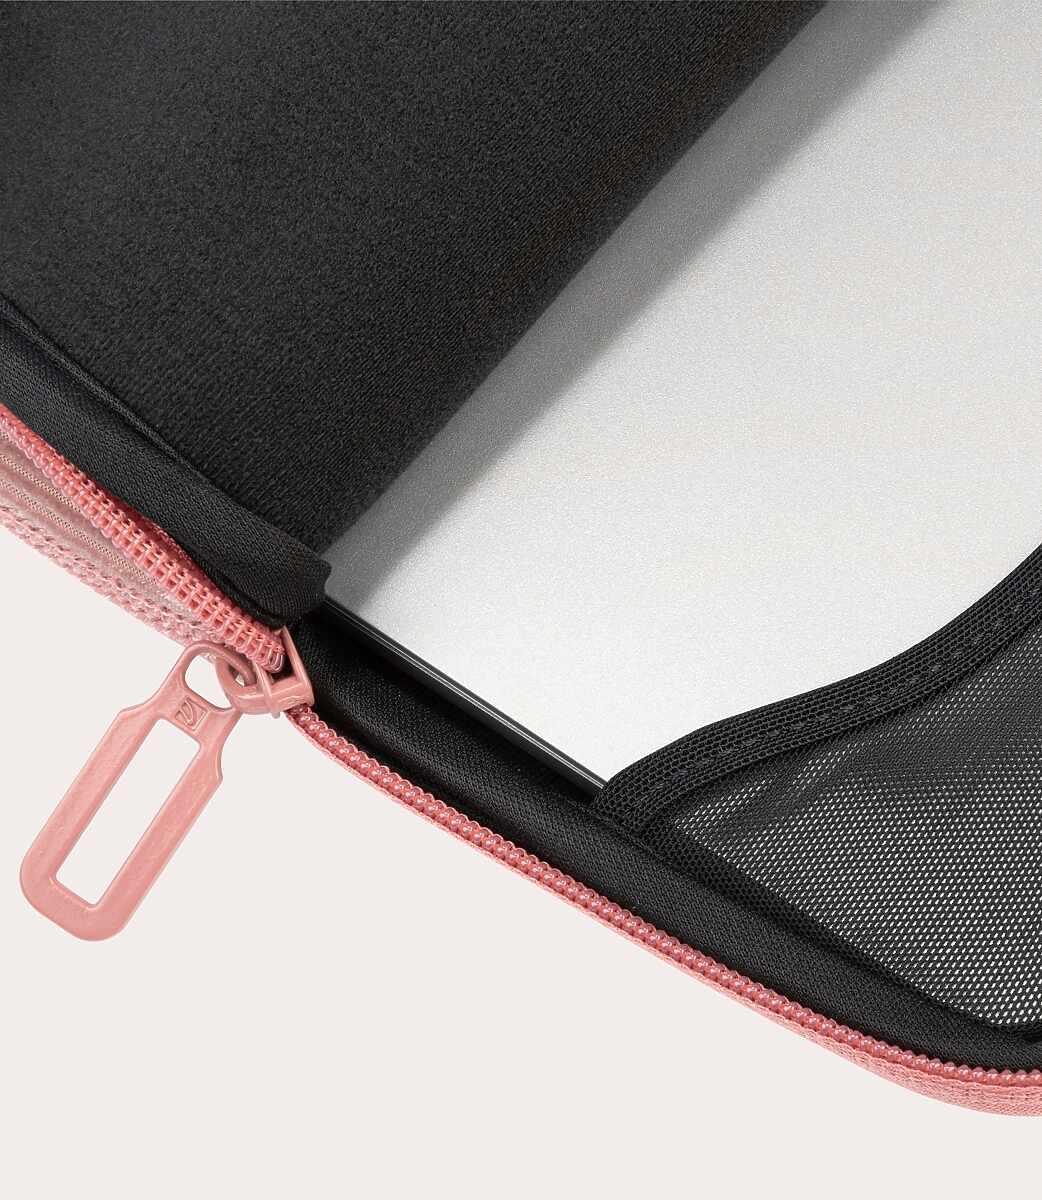 Tucano Velluto Sleeve for laptops up to 16in